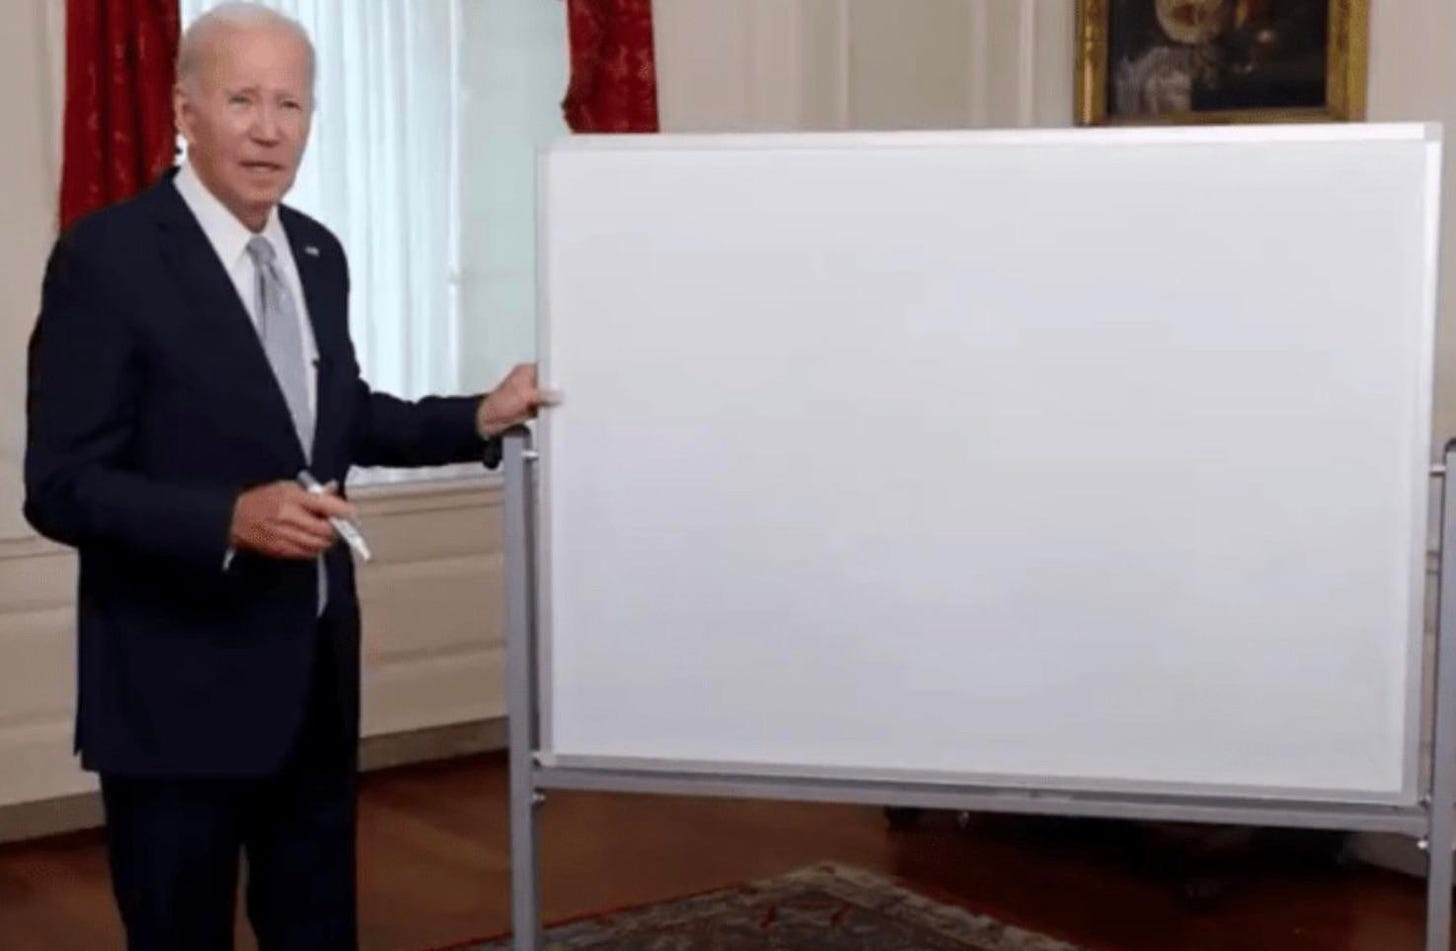 Invest in Whiteboard Biden while the getting's good. : r/MemeEconomy